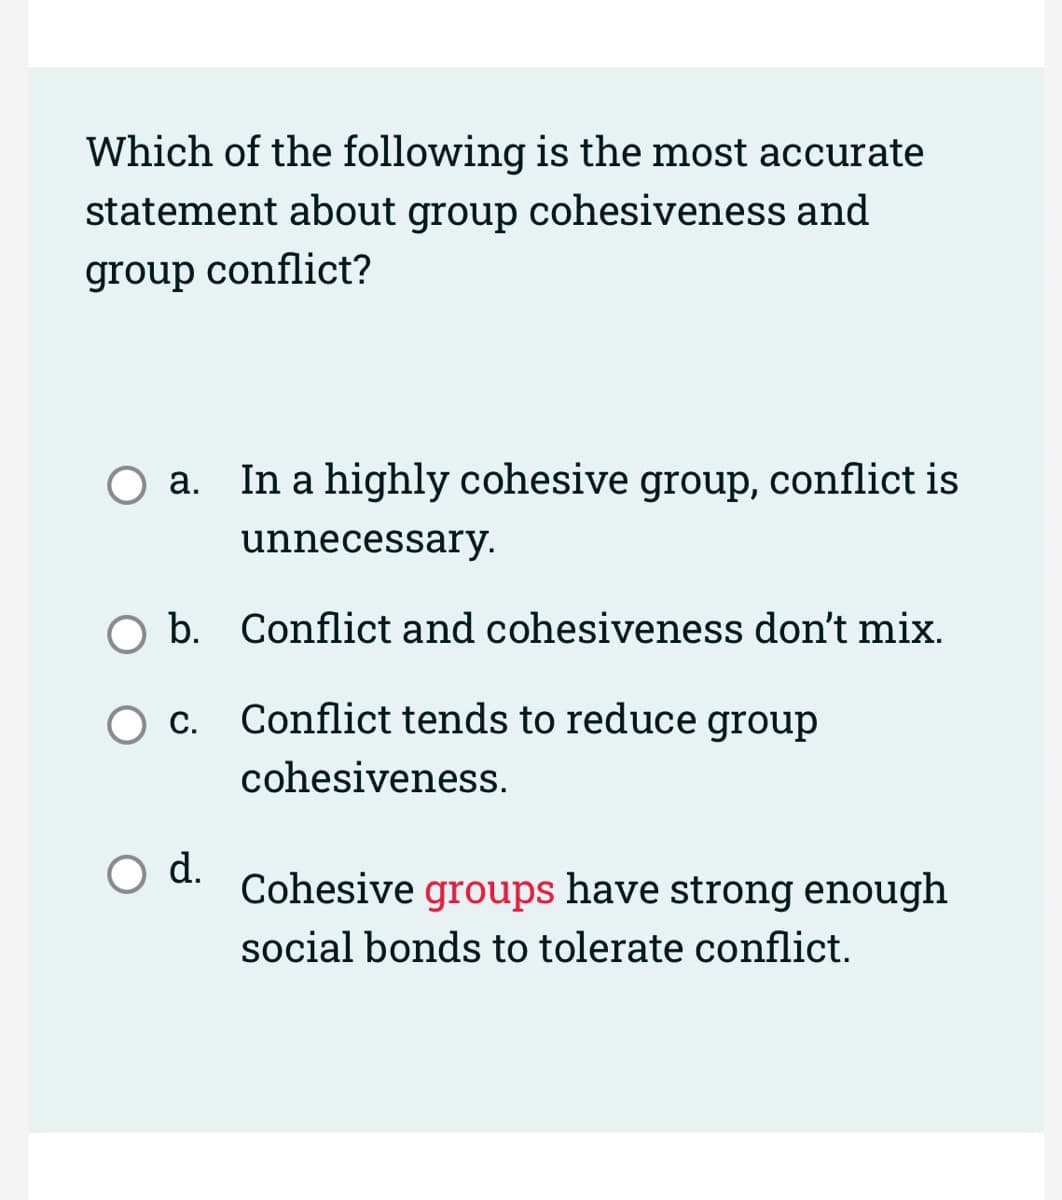 Which of the following is the most accurate
statement about group cohesiveness and
group conflict?
a. In a highly cohesive group, conflict is
unnecessary.
b. Conflict and cohesiveness don't mix.
Conflict tends to reduce group
cohesiveness.
C.
O d.
Cohesive groups have strong enough
social bonds to tolerate conflict.